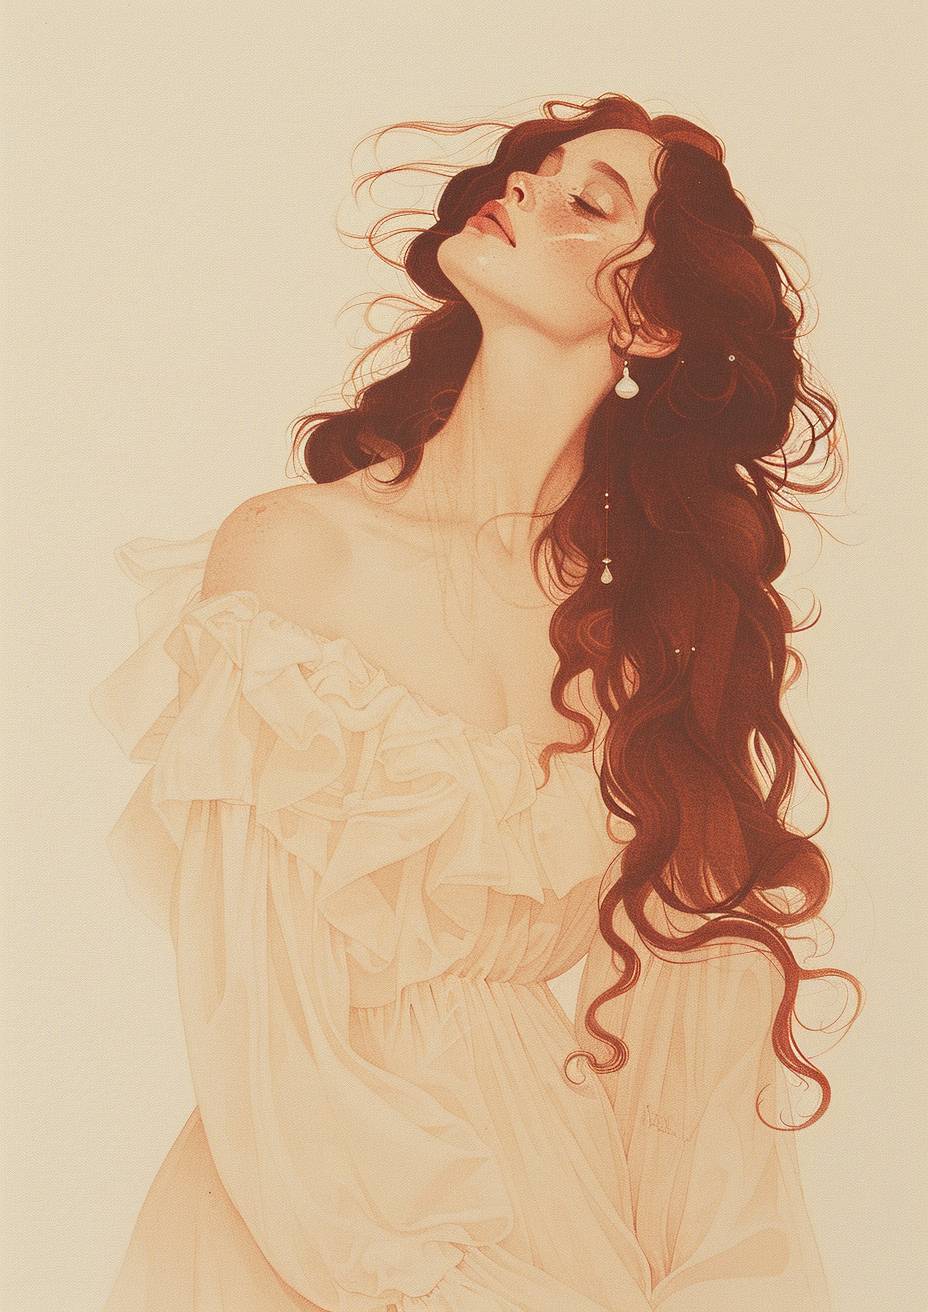 Mary Jane Ansell's hyperrealistic and hyper-detailed pencil and watercolor illustration depicting a portrait of a beautiful woman with long hair in a vintage dress, playful and ironic, lush and detailed, charming character illustrations